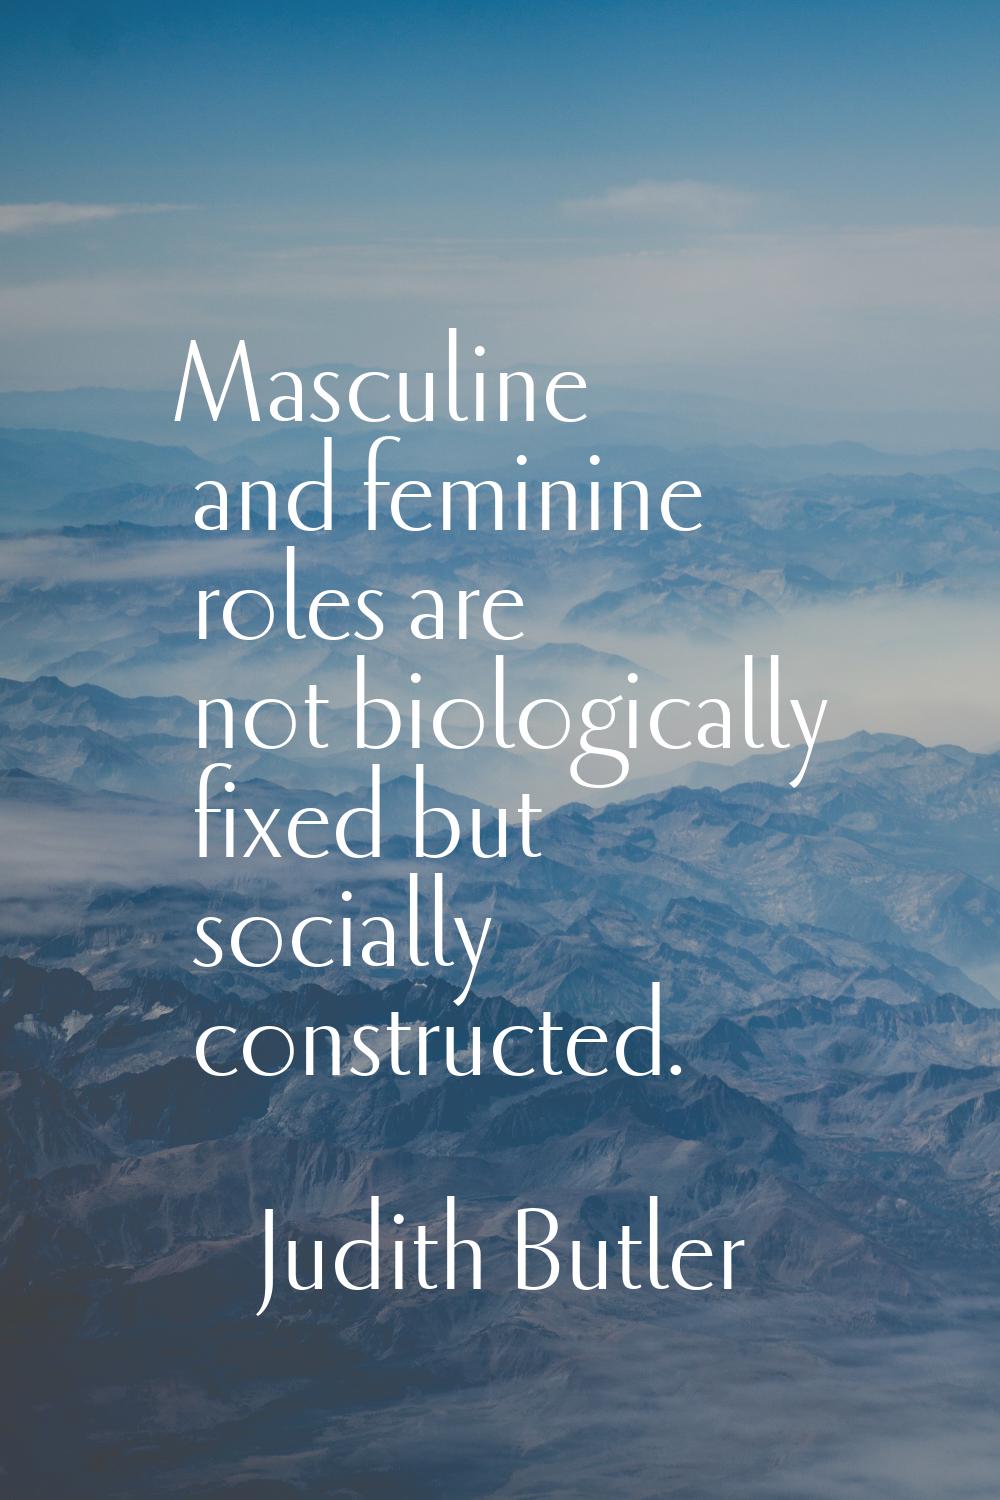 Masculine and feminine roles are not biologically fixed but socially constructed.